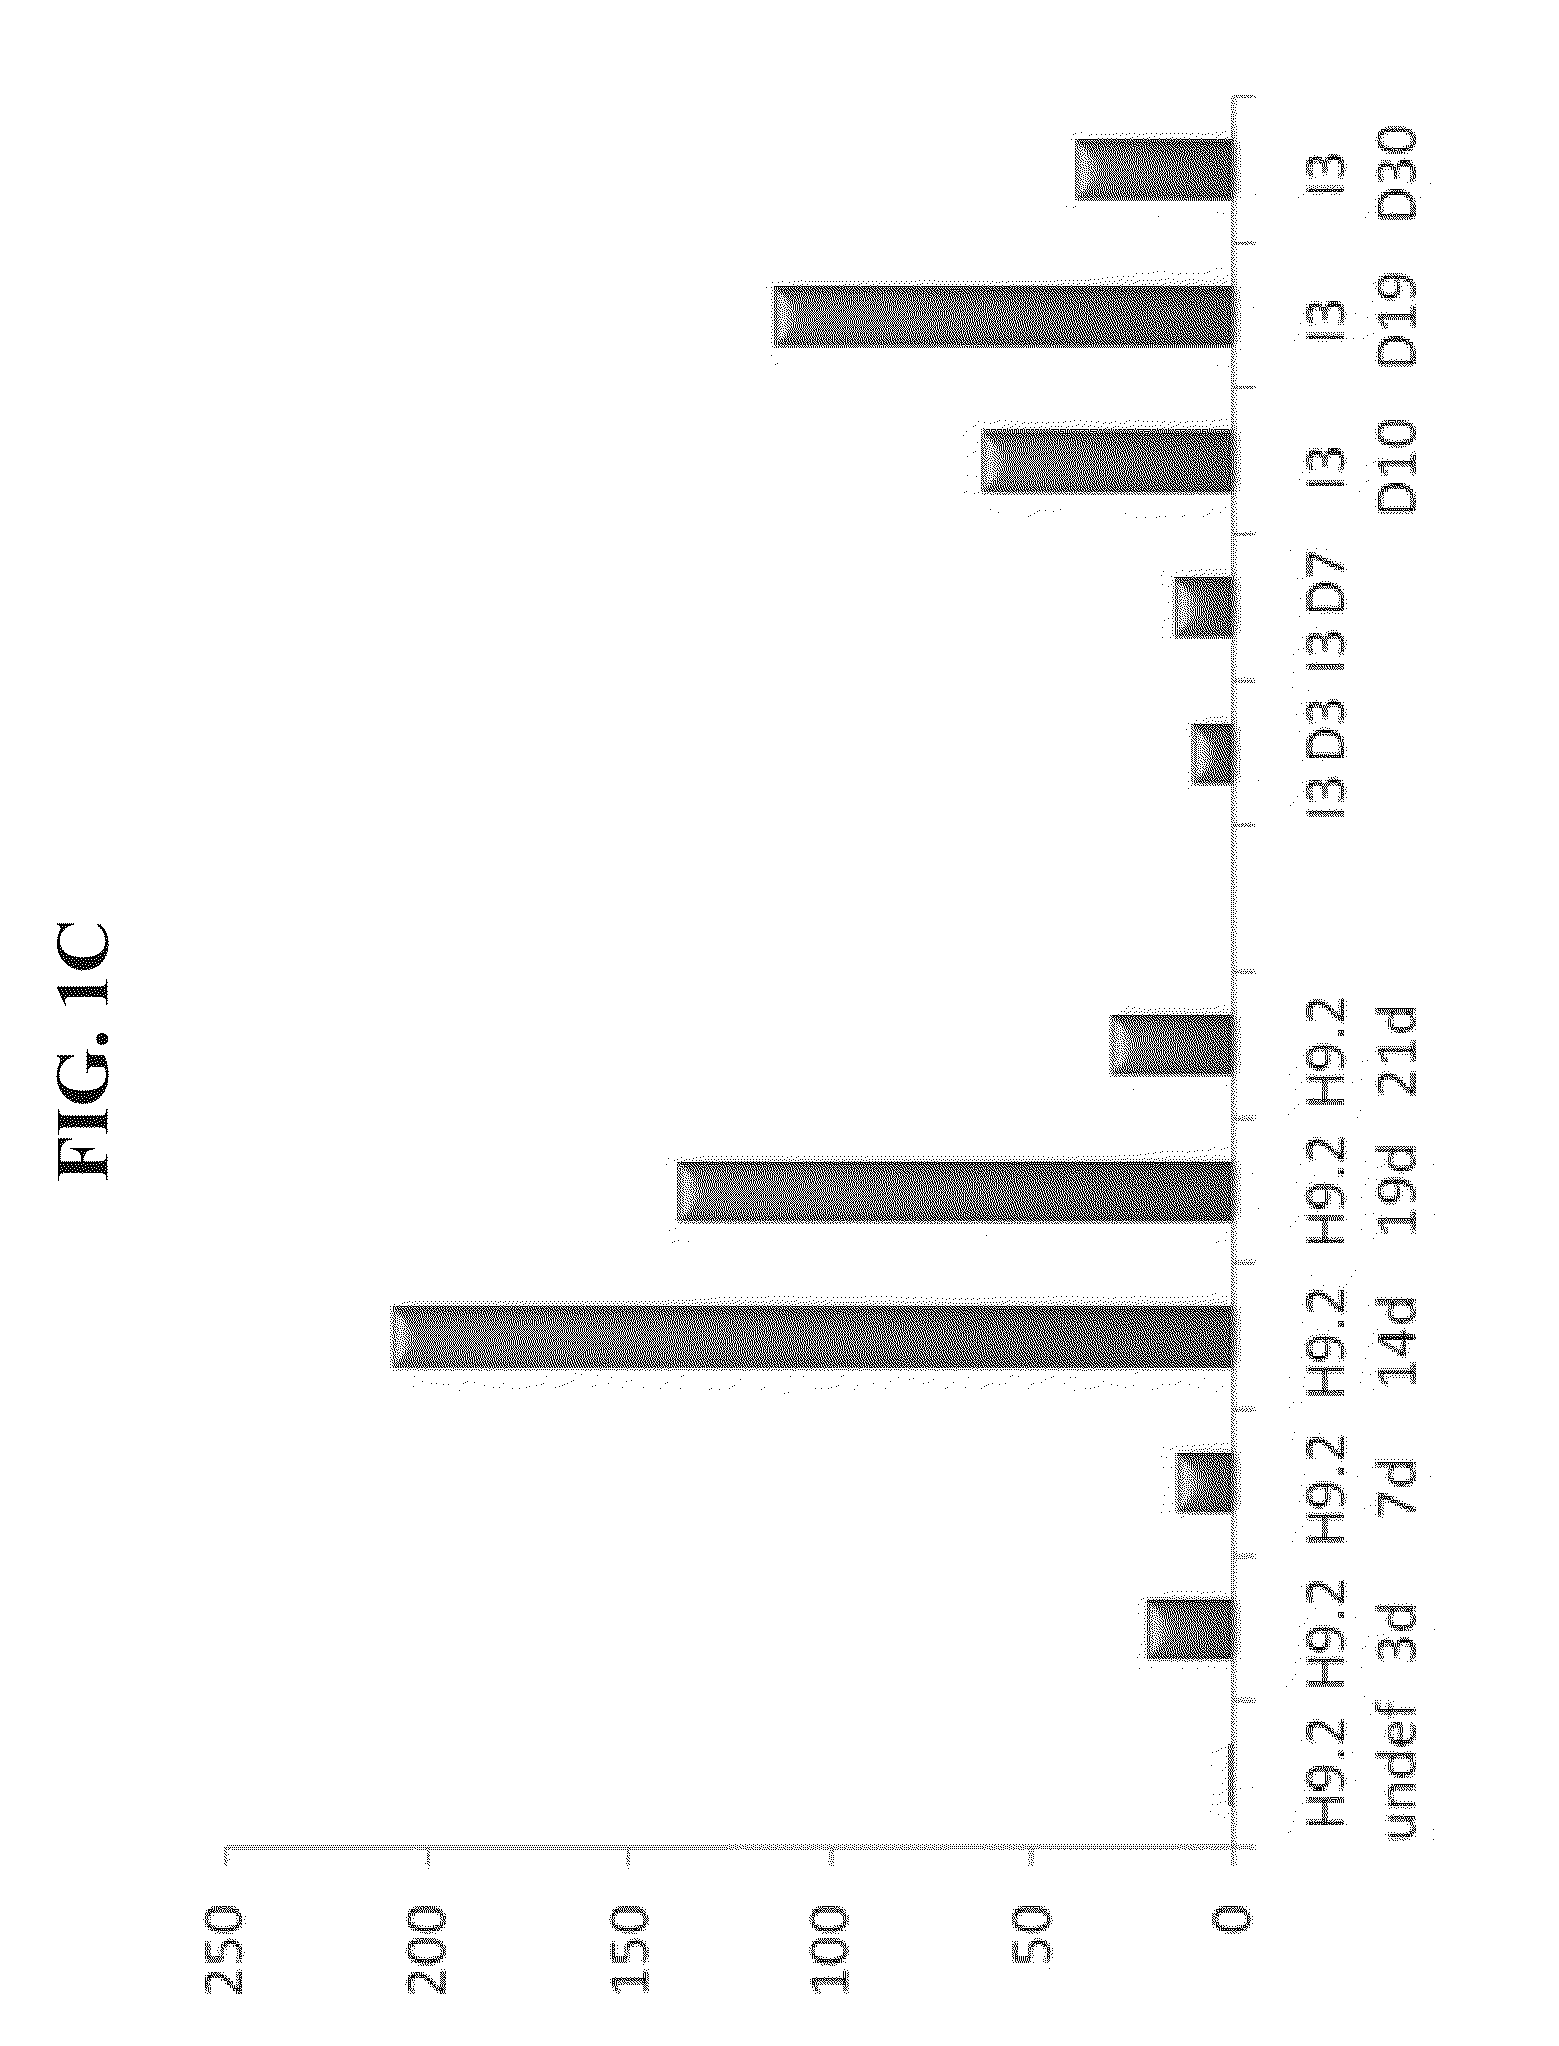 Populations of pancreatic progenitor cells and methods of isolating and using same